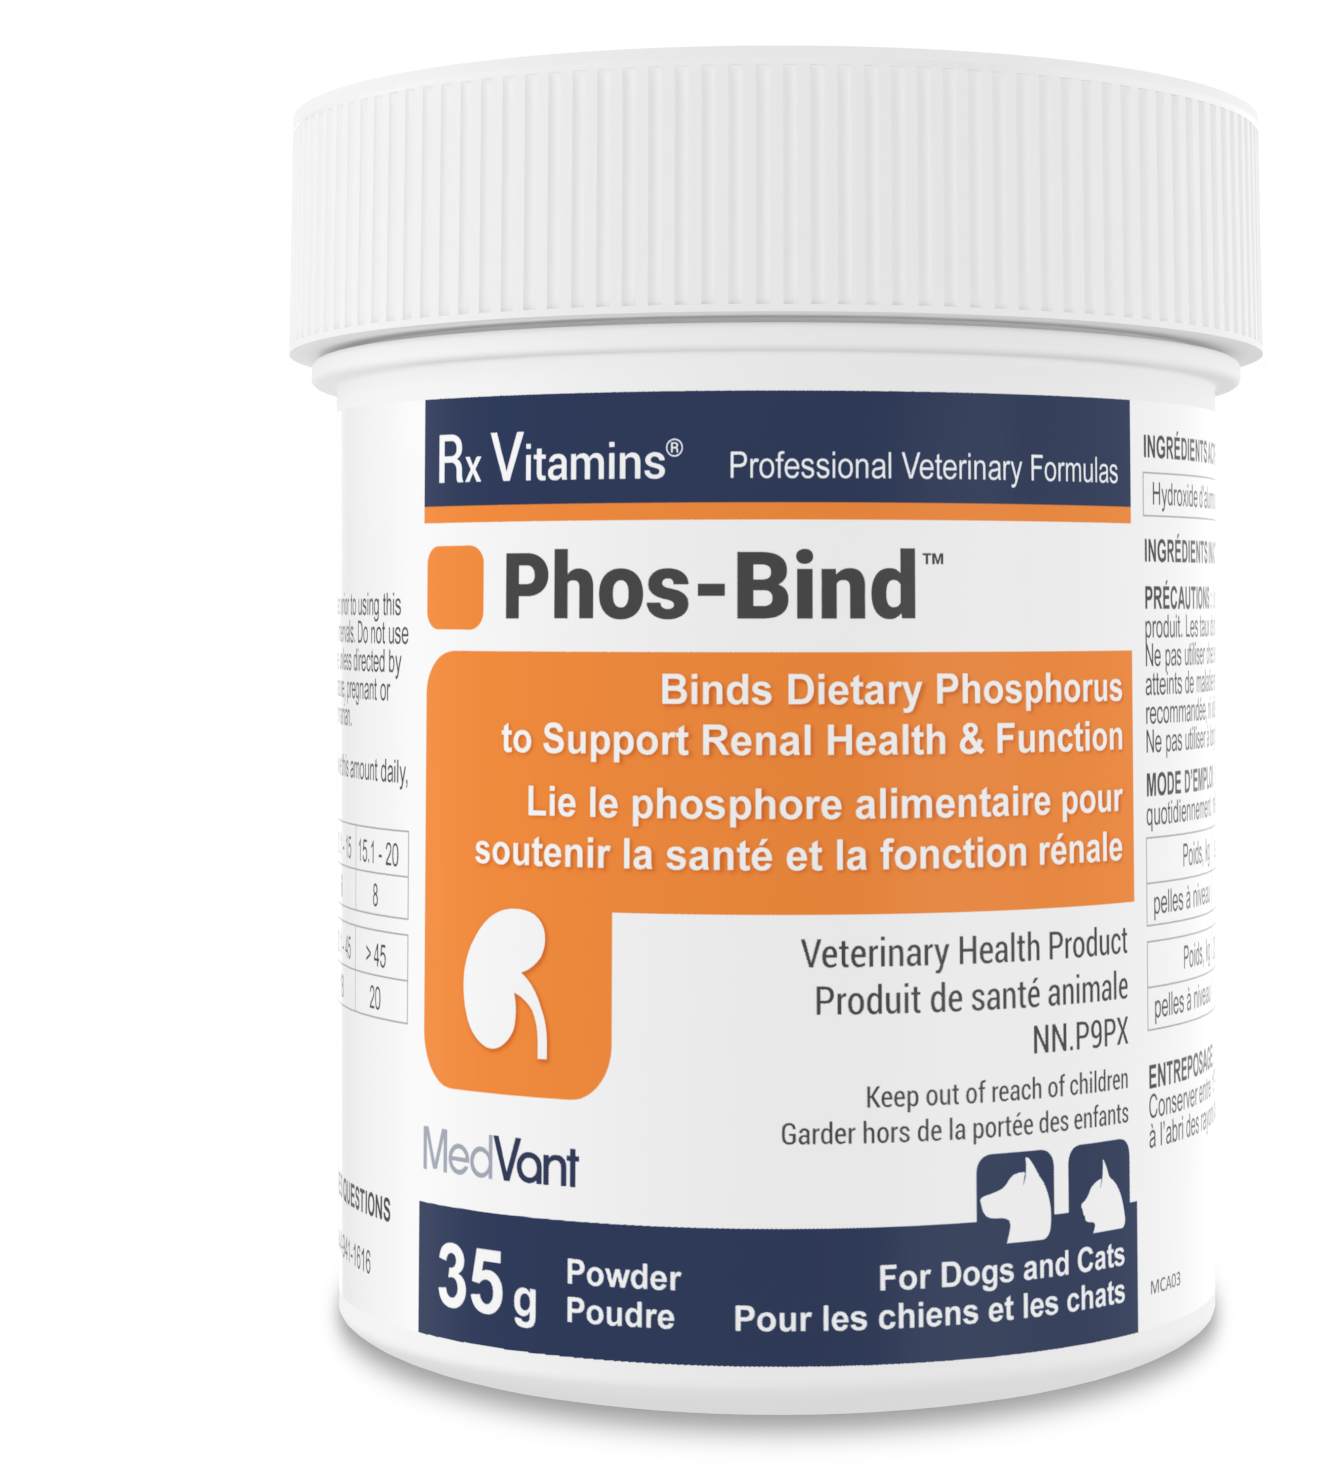 Phos-Bind - New and Improved